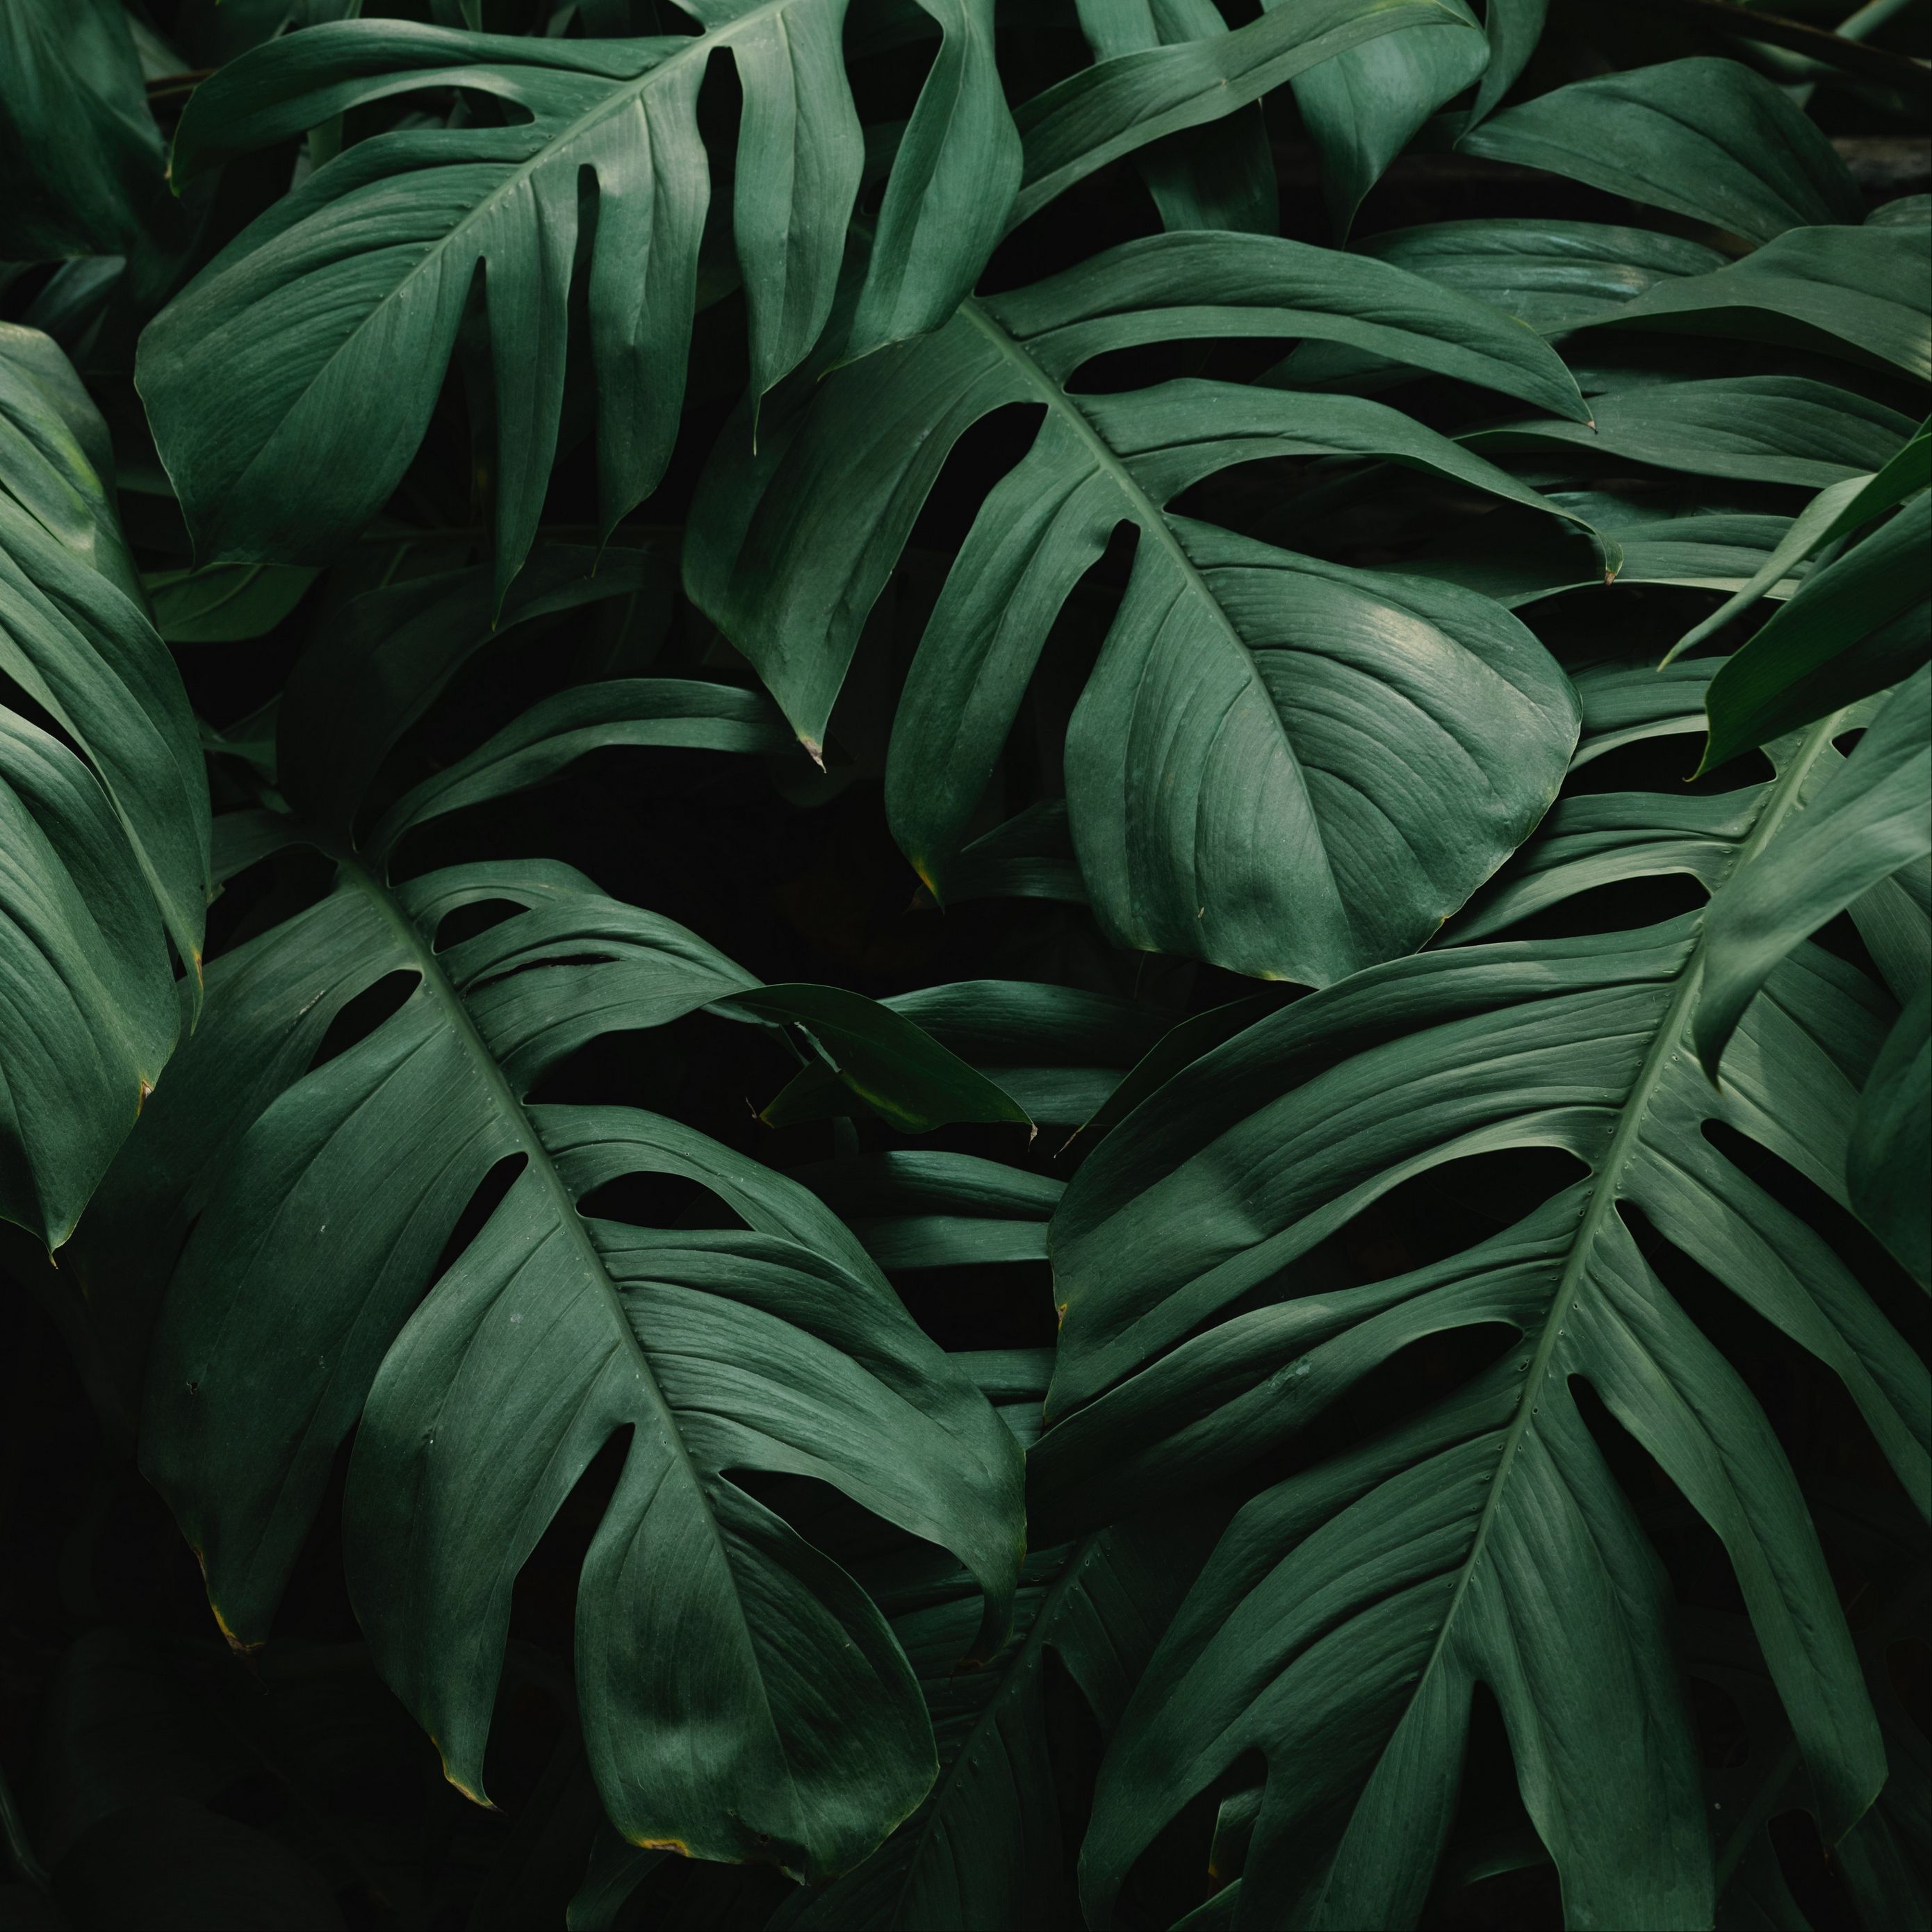 Monstera plant leaves in a dark setting - Plants, leaves